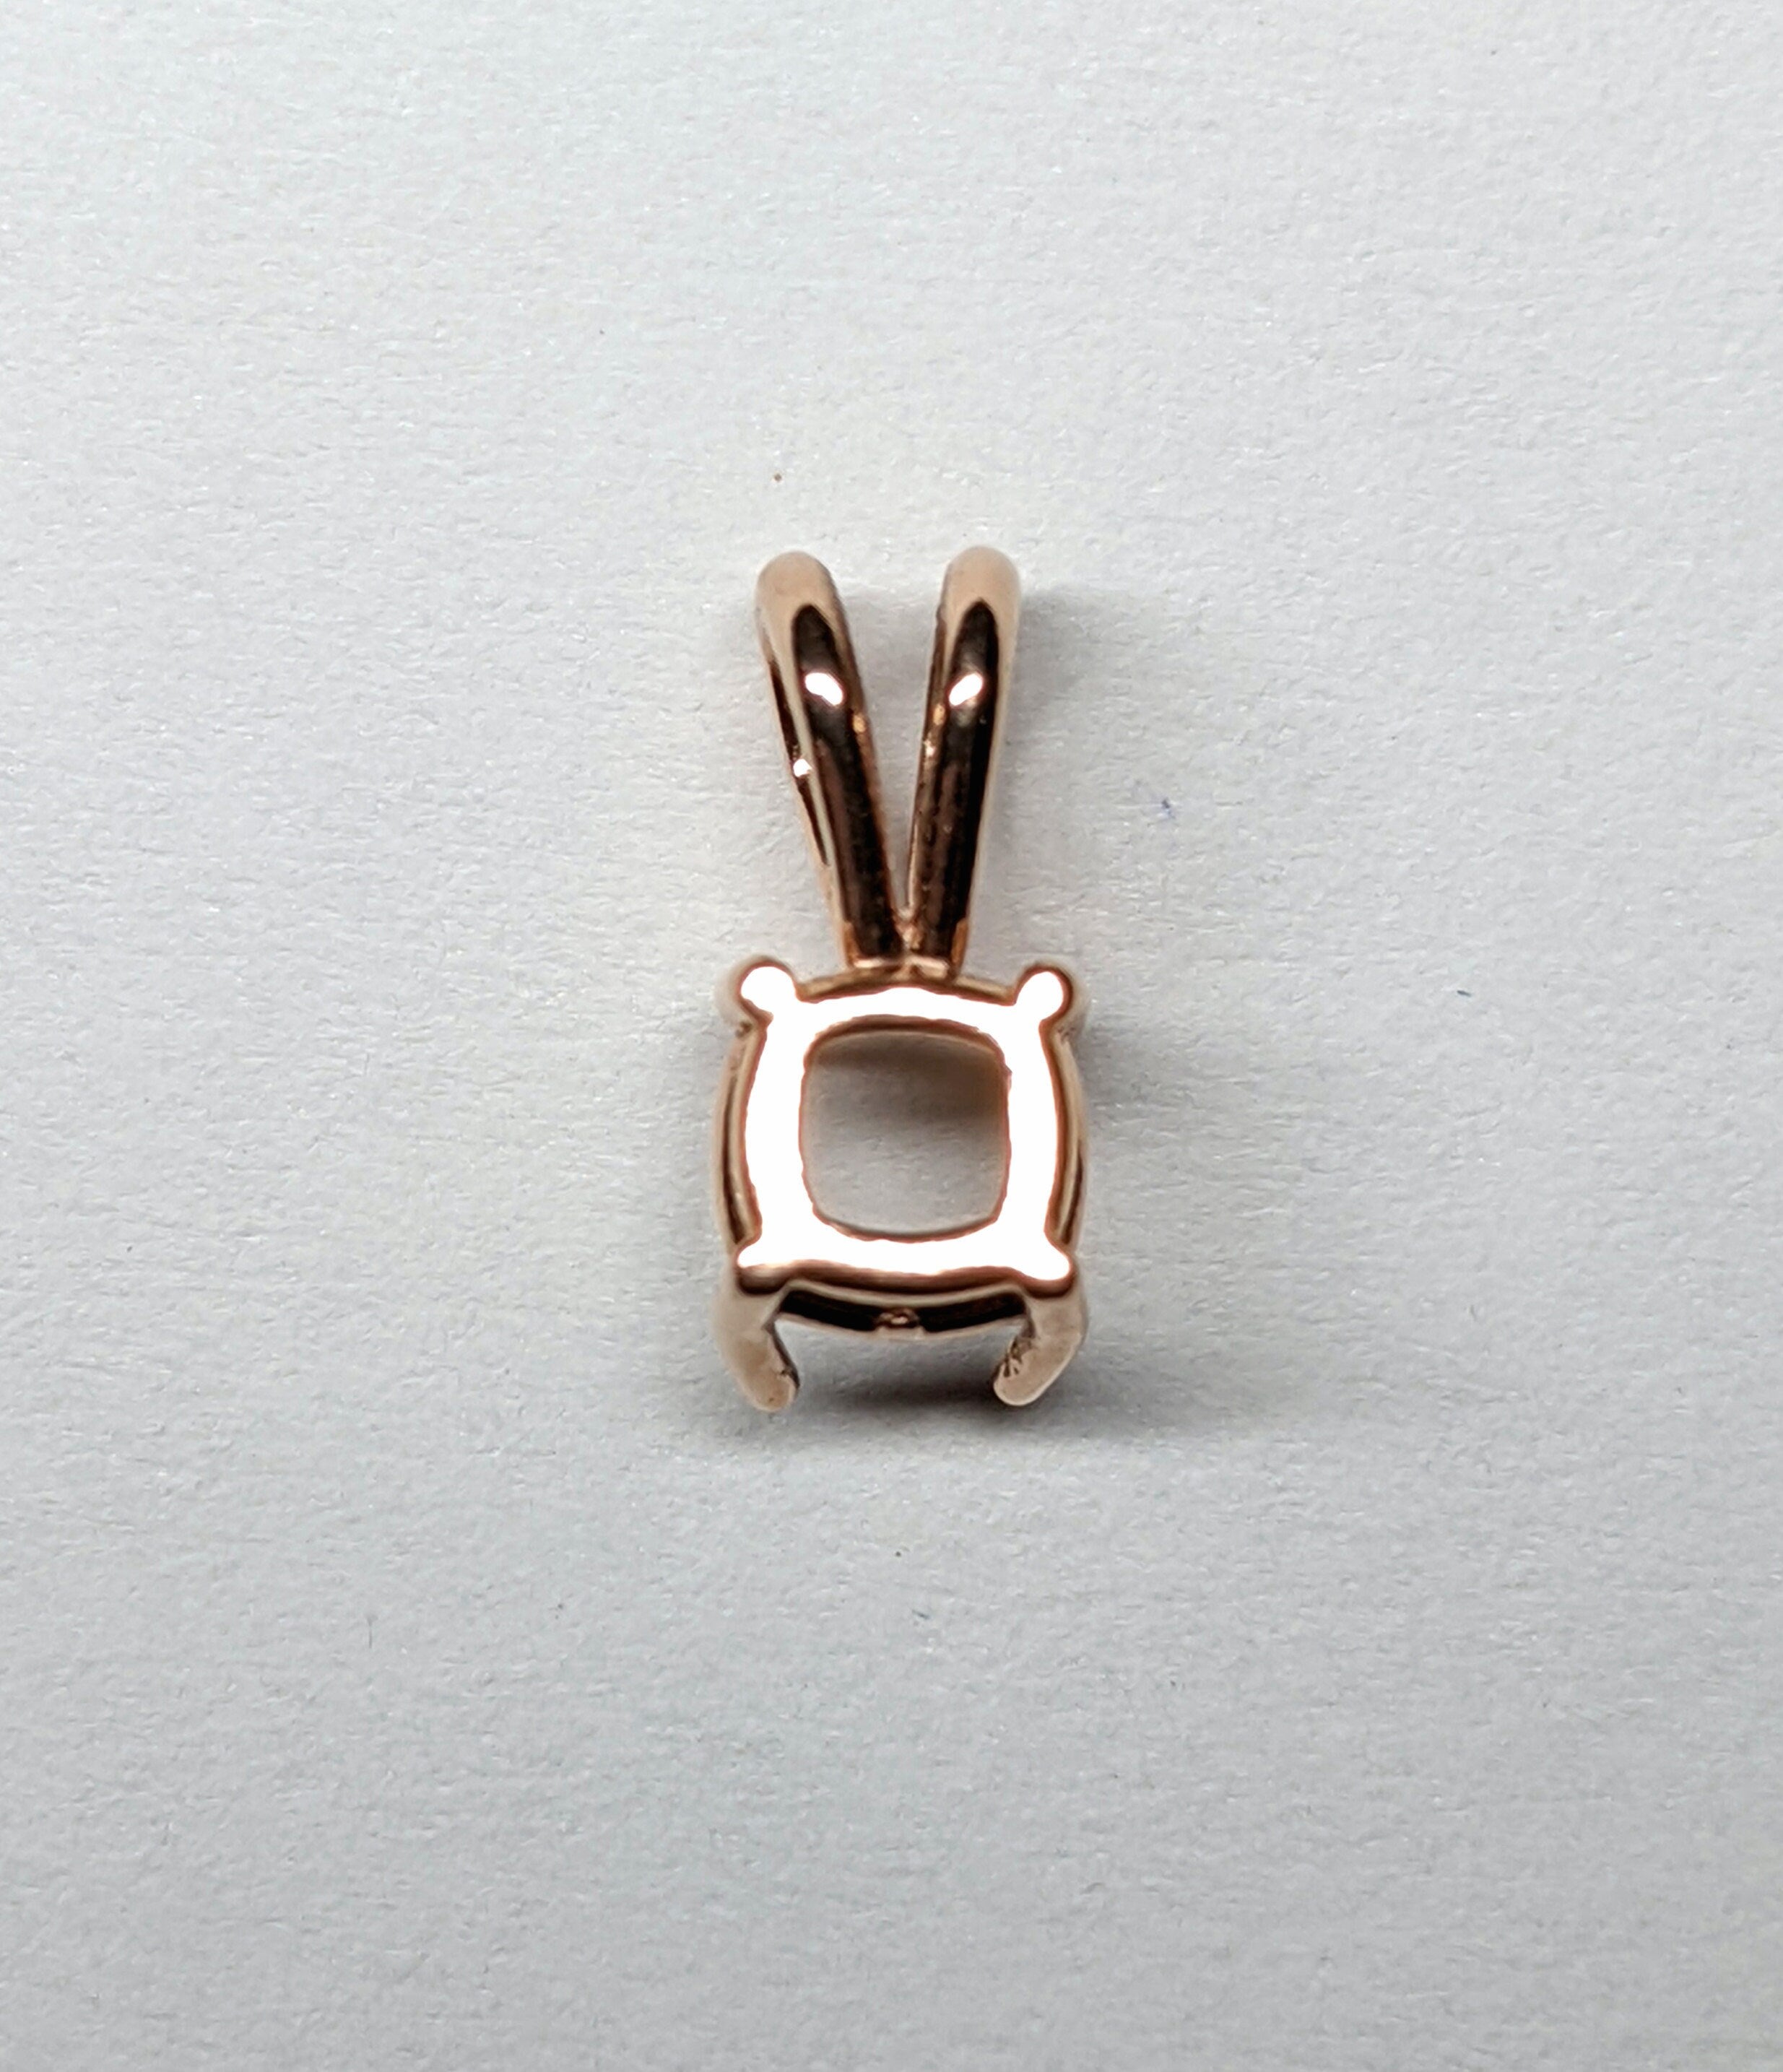 14K Gold Cushion Shape Pendant Setting, Finding, Basket, Prongs | Square 4mm 5mm 6mm 7mm 8mm 9mm 10mm | Solitaire Necklace | Made In America